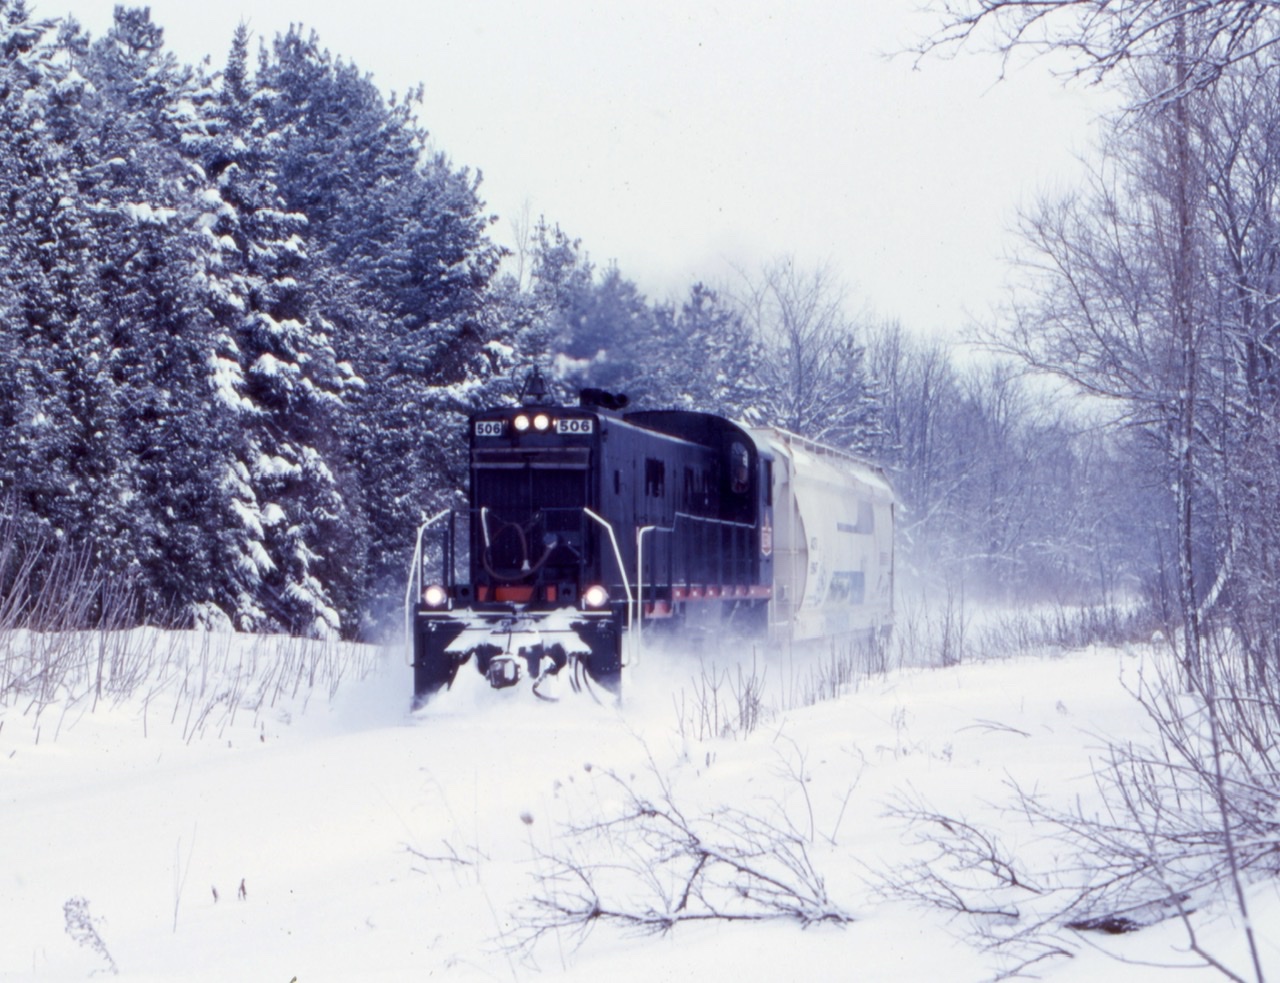 This size of train was somewhat common by this date thanks to a struggling economy. The RS23’s were common power during this time as they were more fuel efficient then the RS18’s. A decent snowfall over the weekend made for a nice Christmas card like scene as 506 headed for Guelph.